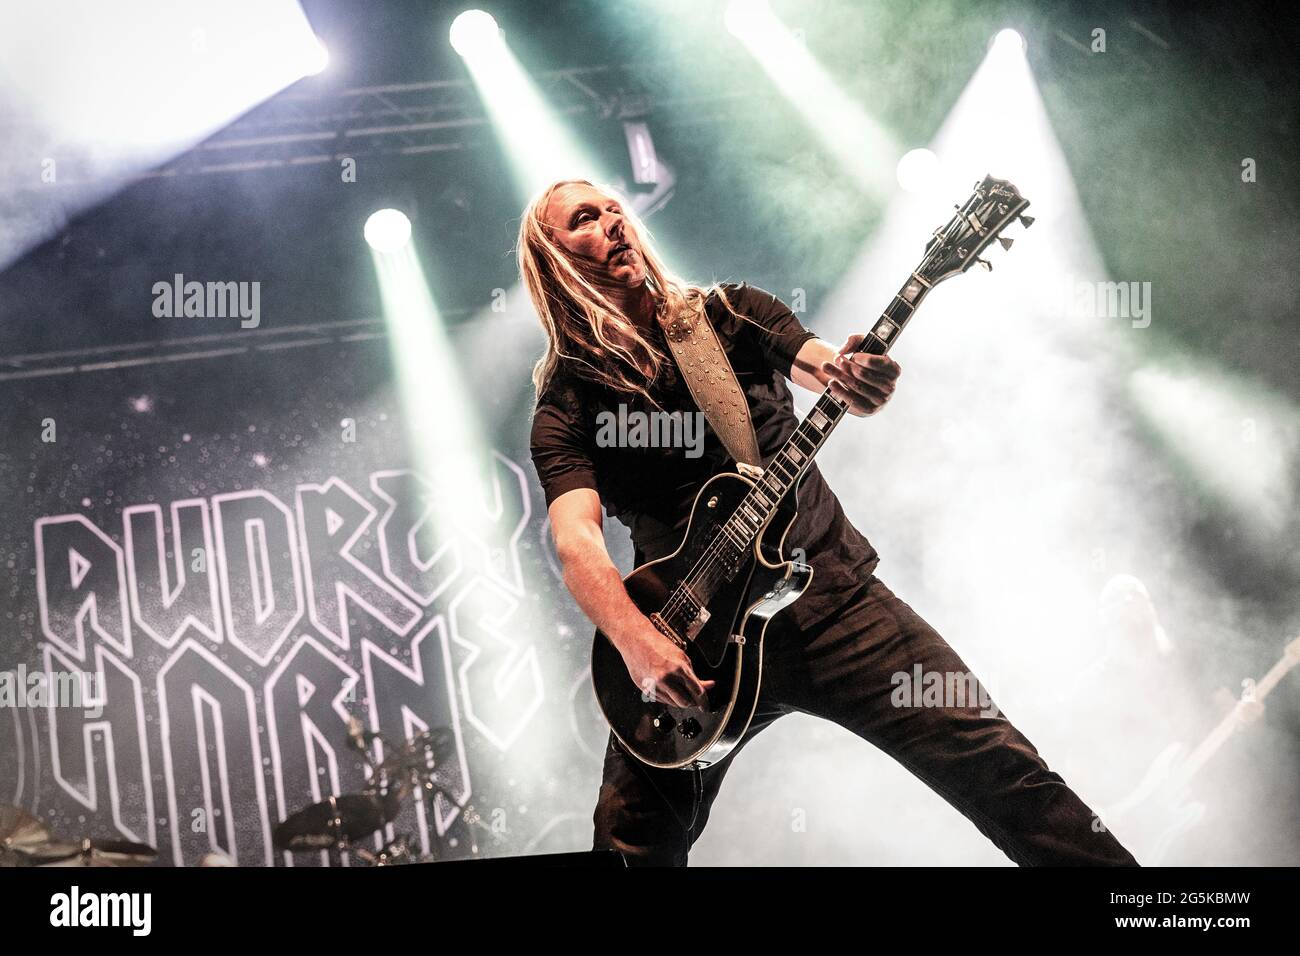 Oslo, Norway. 25th June, 2021. The Norwegian hard rock band Audrey Horne  performs a live concert at Sentrum Scene in Oslo. Here guitarist Thomas  Tofthagen is seen live on stage. (Photo Credit: